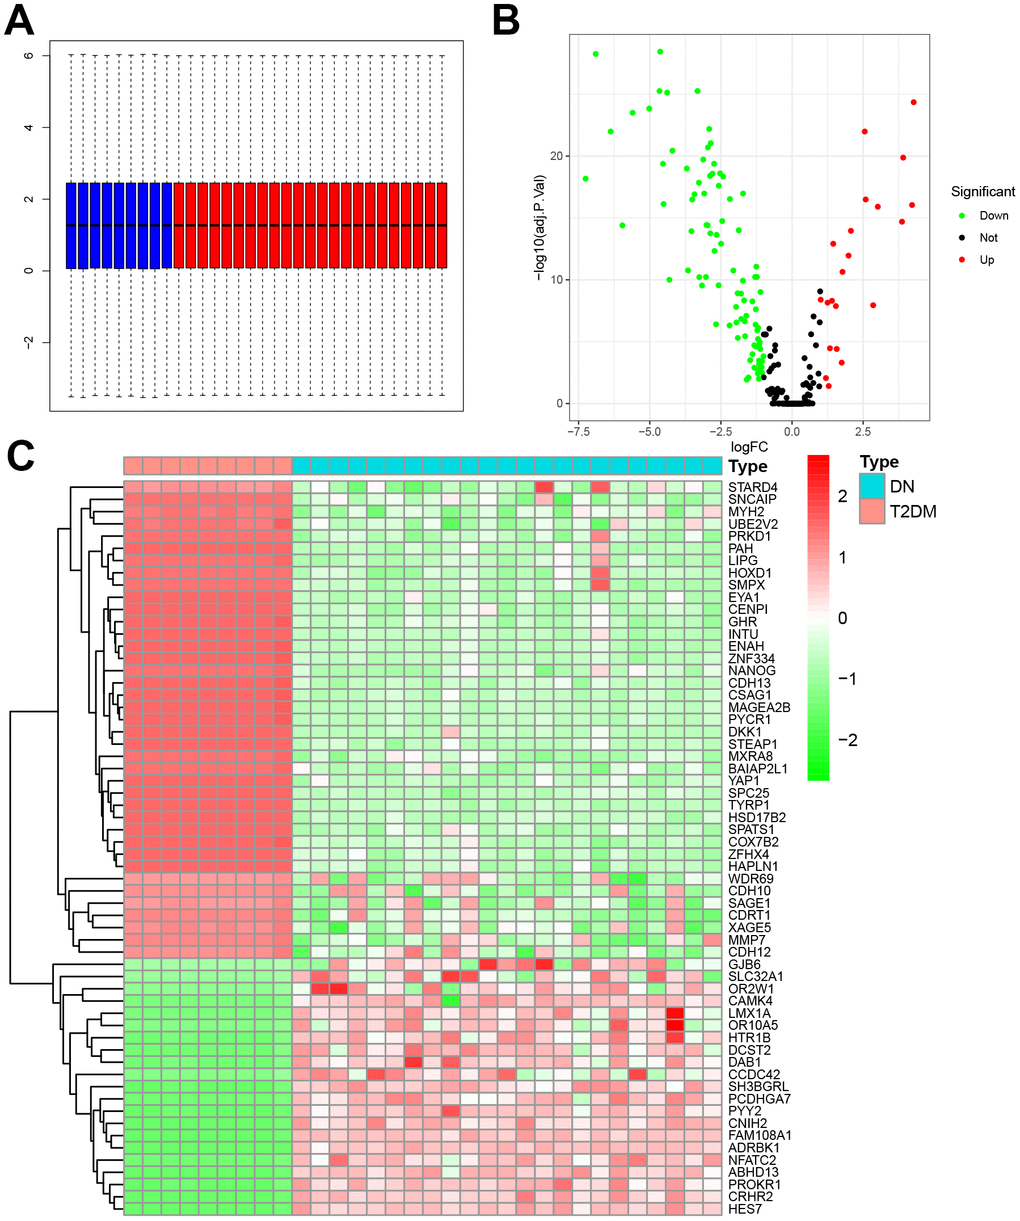 Differentially expressed genes between GSE30529 and GSE30528. (A) Normalized boxplot of control and DN groups. (B) Volcano plot of differentially expressed genes. (C) Heatmap of differentially expressed genes between control and DN groups.